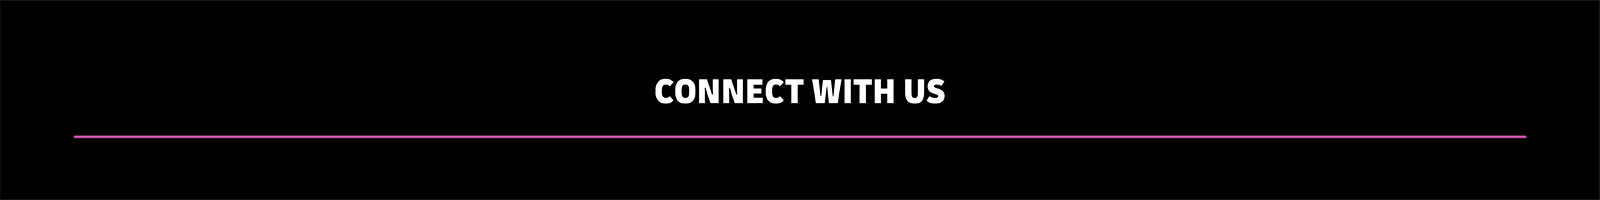 Connect With Us Banner